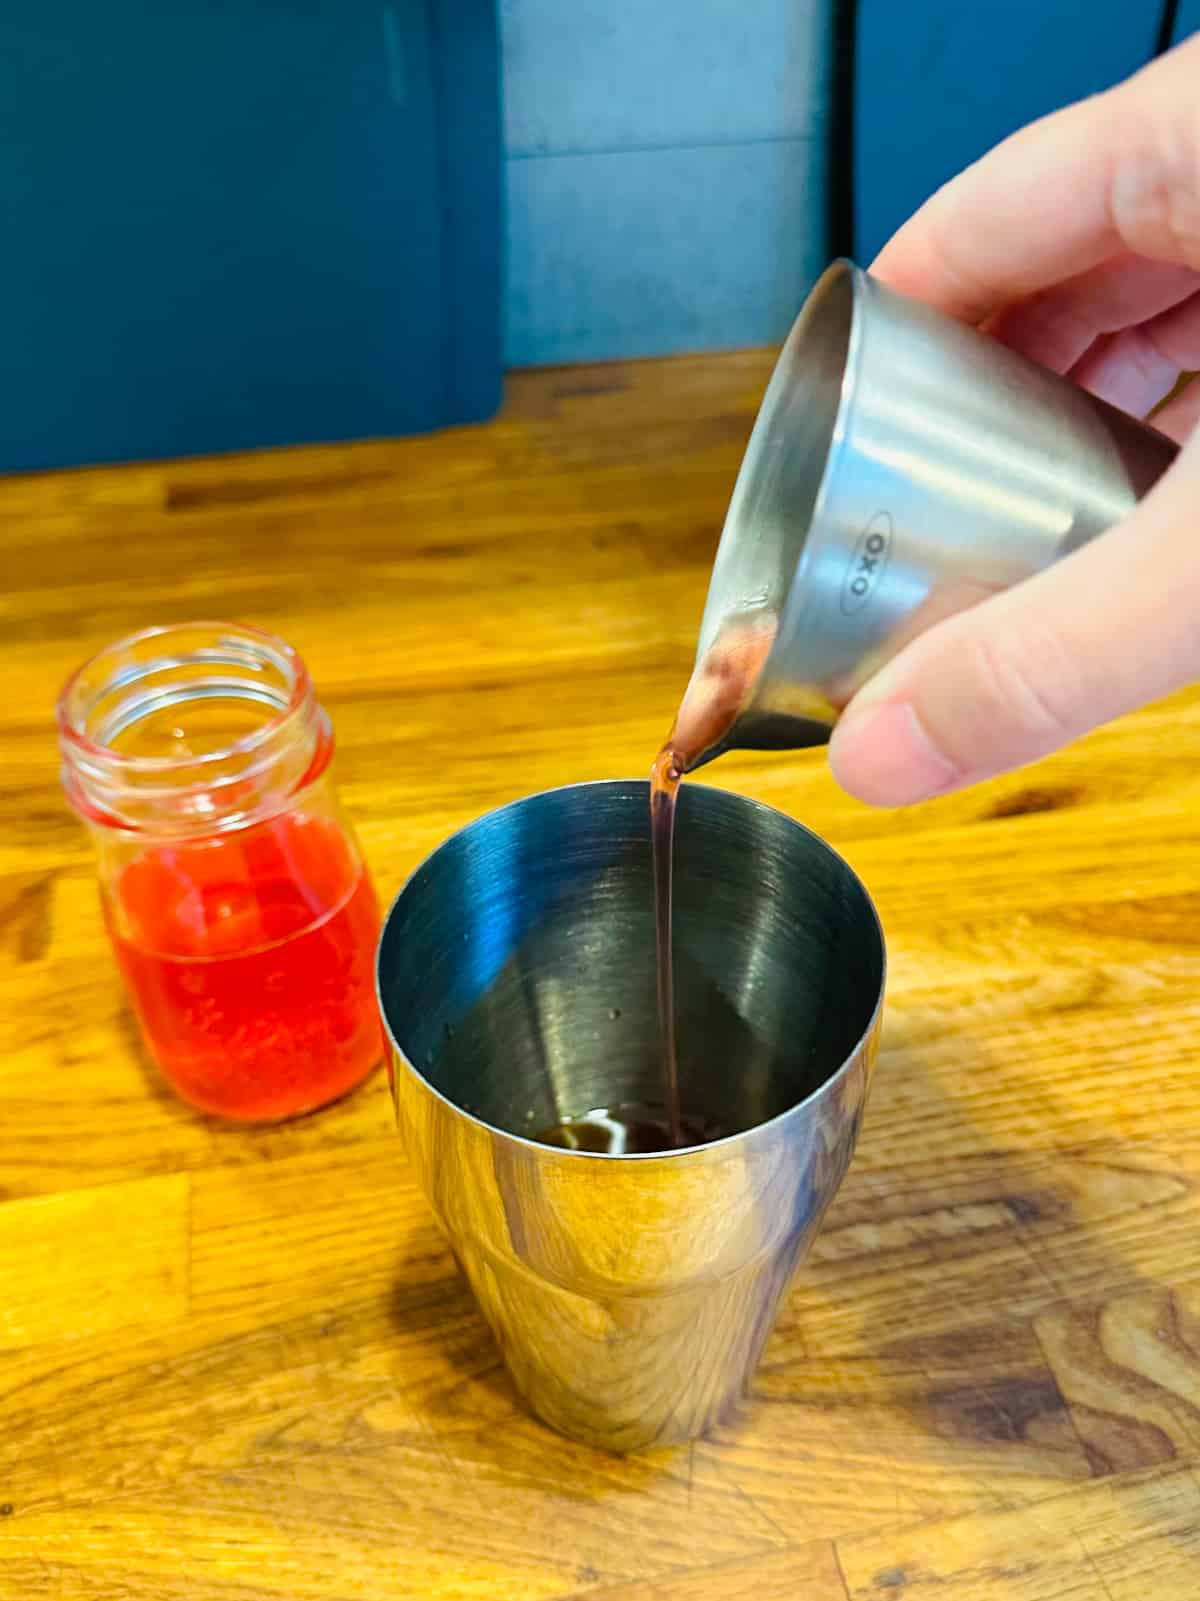 Pink liquid being poured from a steel measuring jigger into a cocktail shaker next to a small jar of pink liquid.